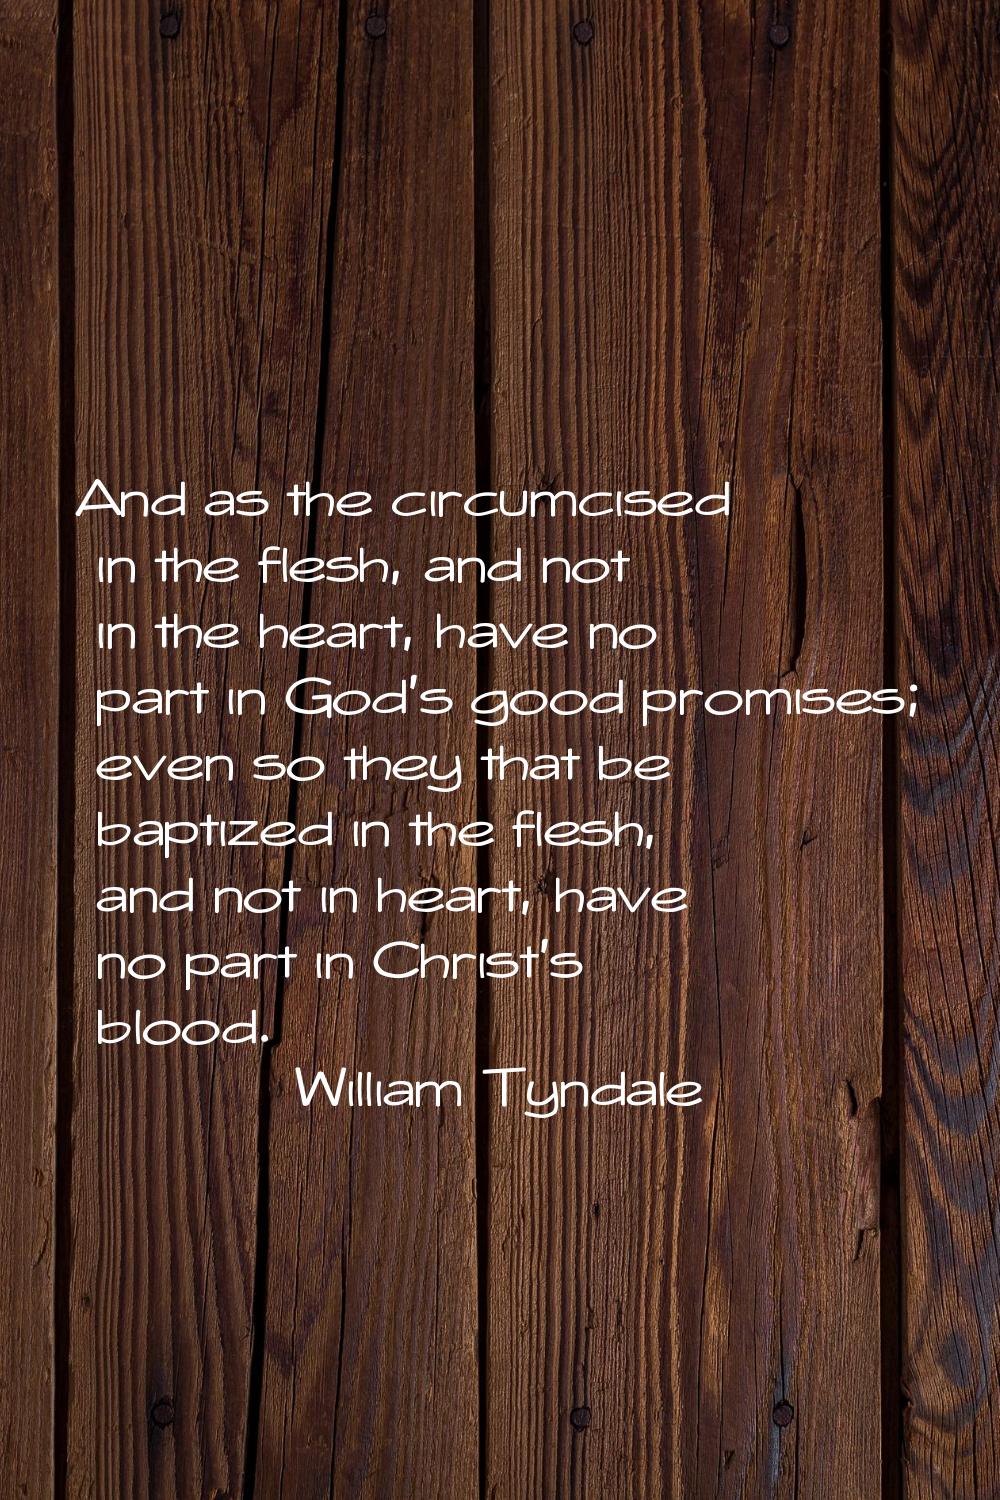 And as the circumcised in the flesh, and not in the heart, have no part in God's good promises; eve